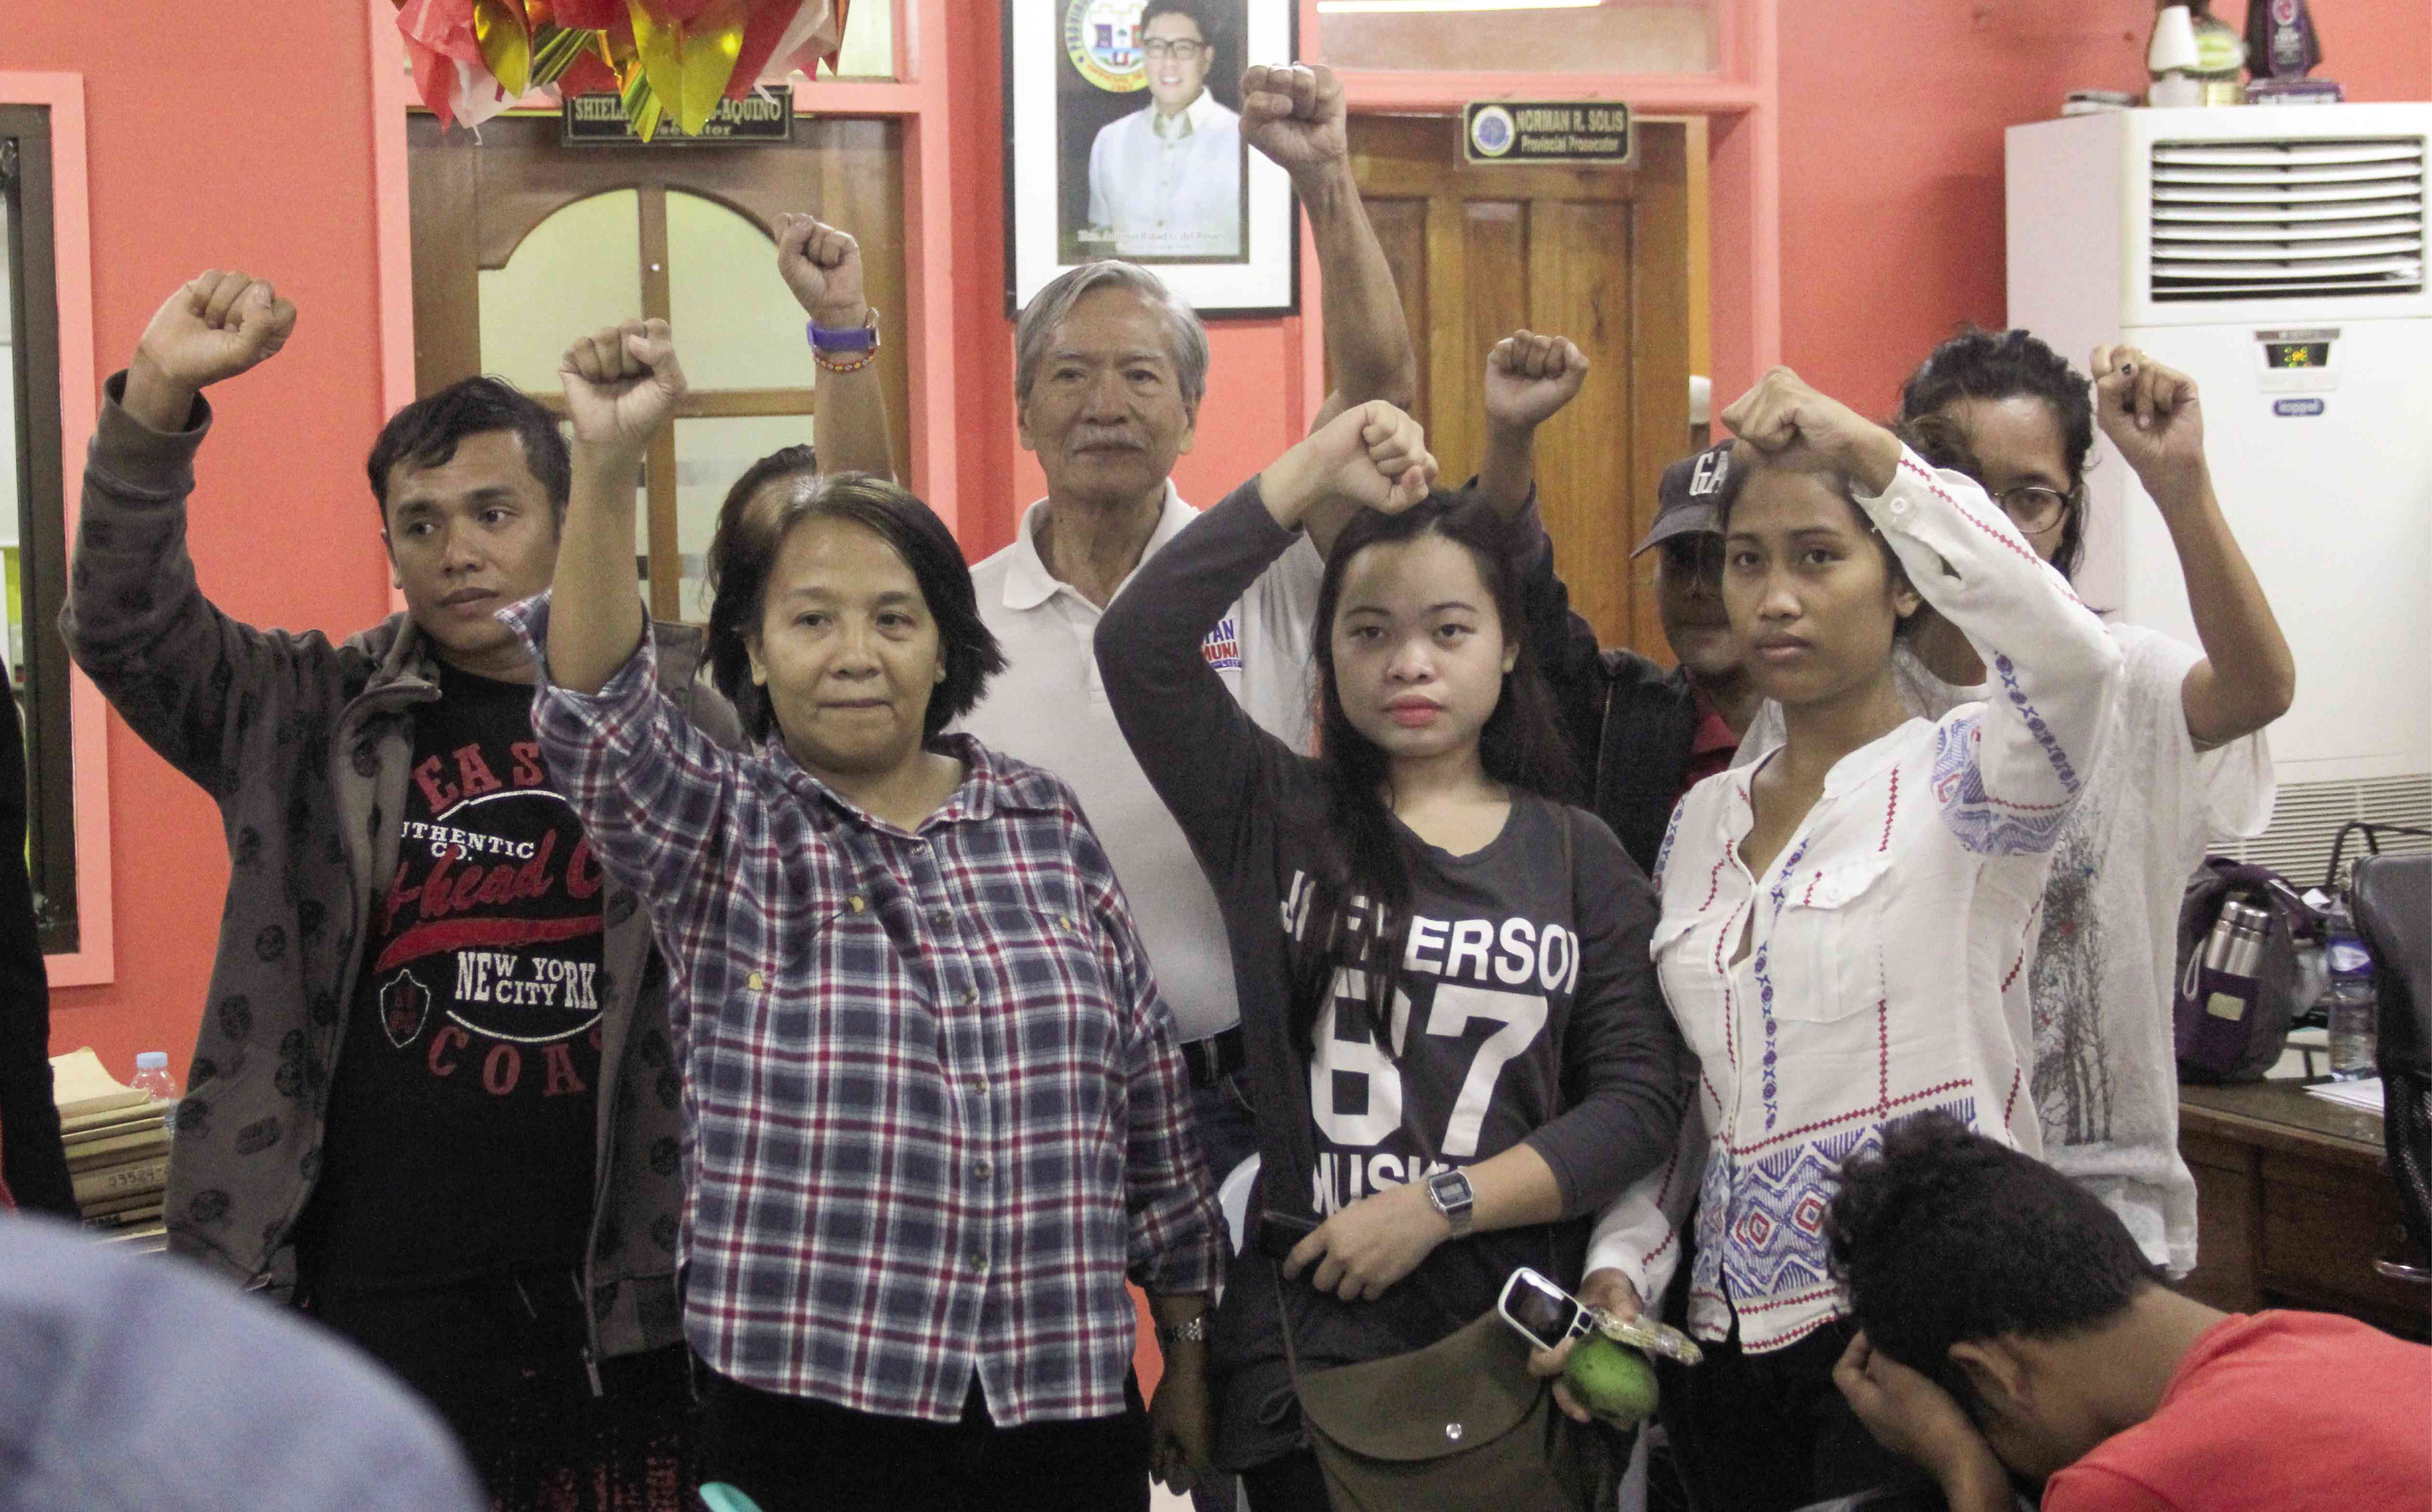 Satur Ocampo’s group freed; gov’t ‘dirty work’ hit